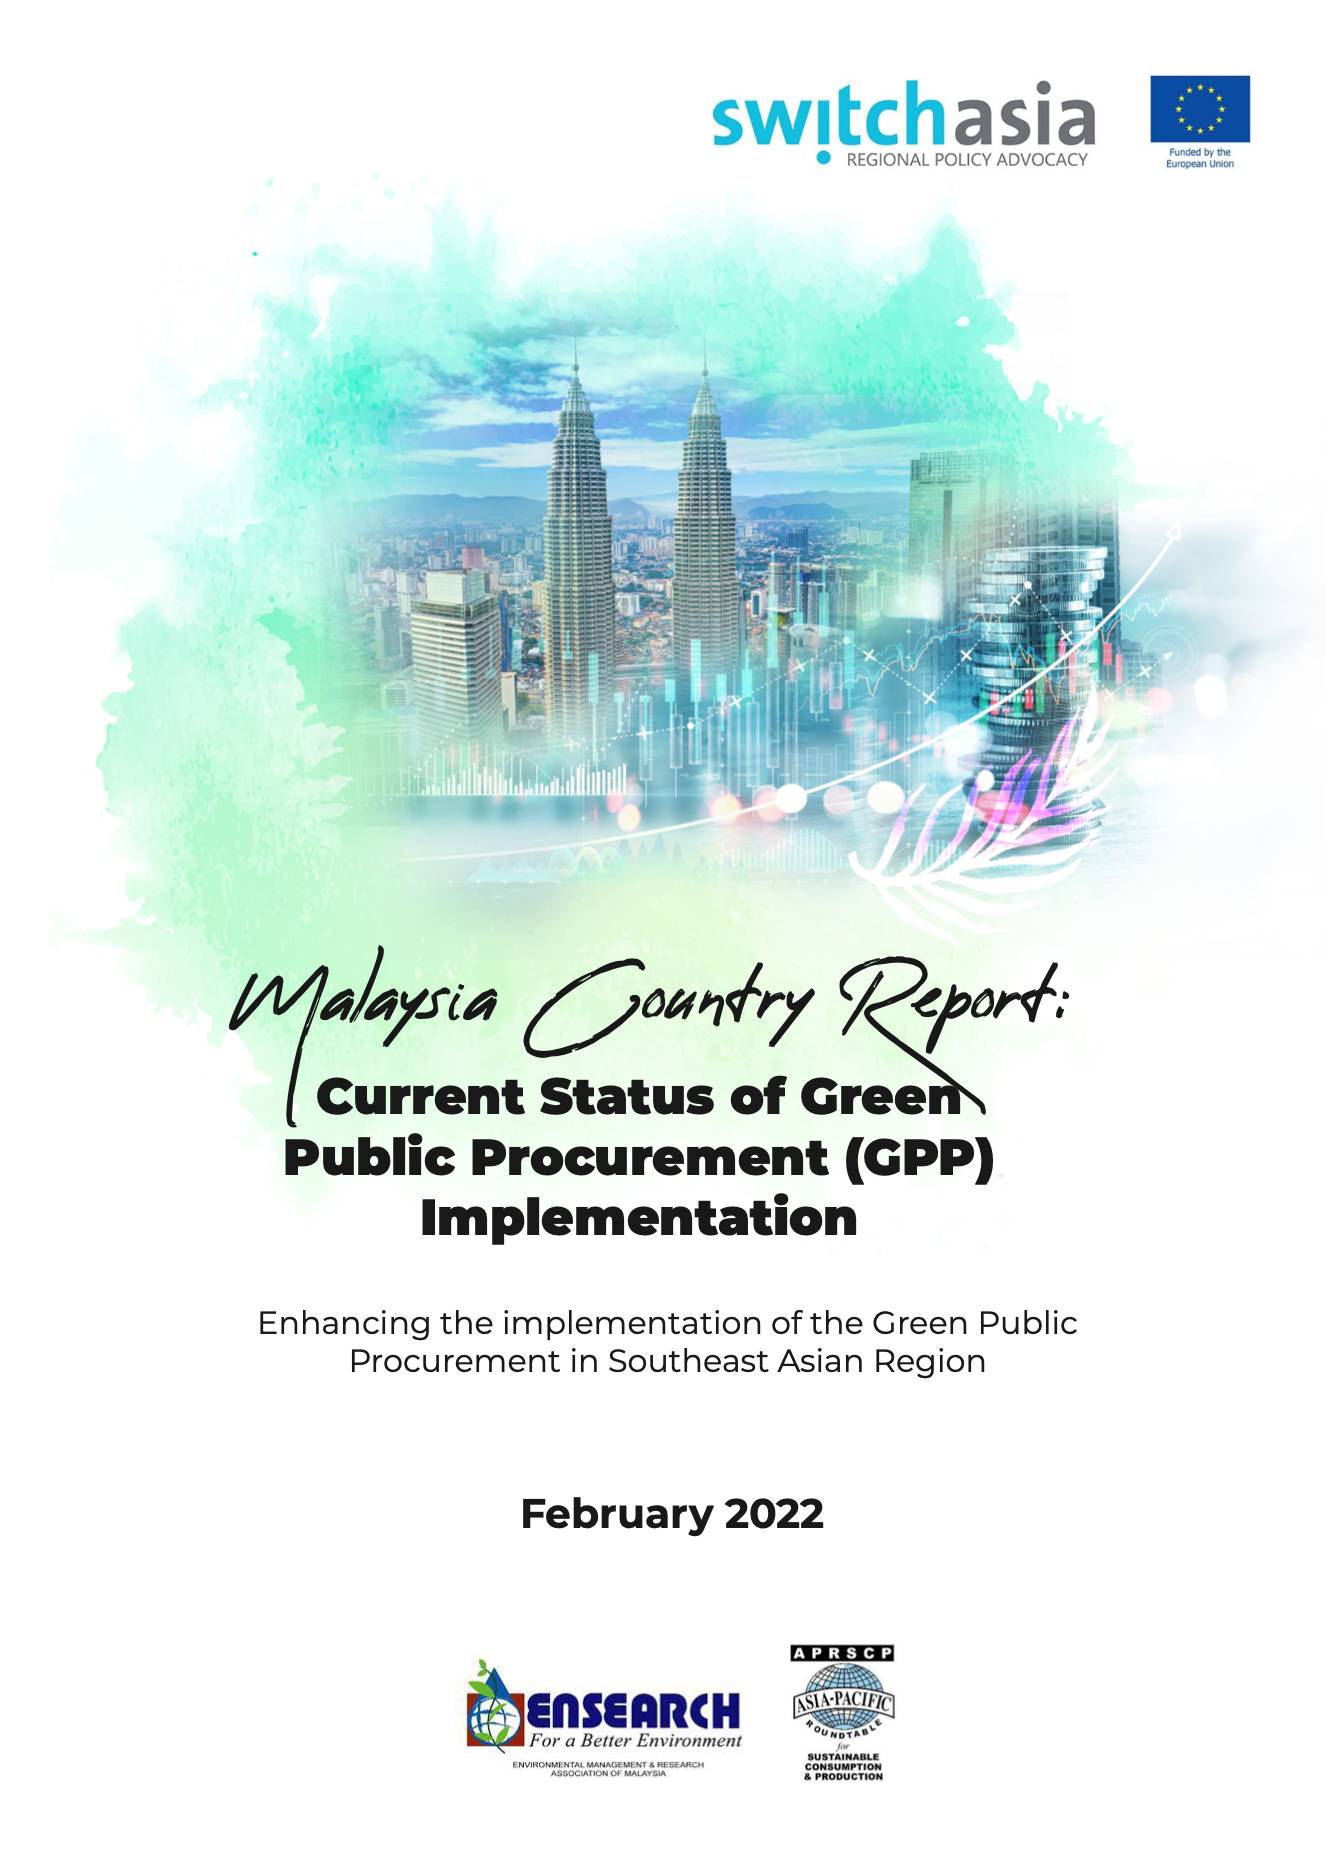 Malaysia Country Report: Current Status of Green Public Procurement Implementation3401